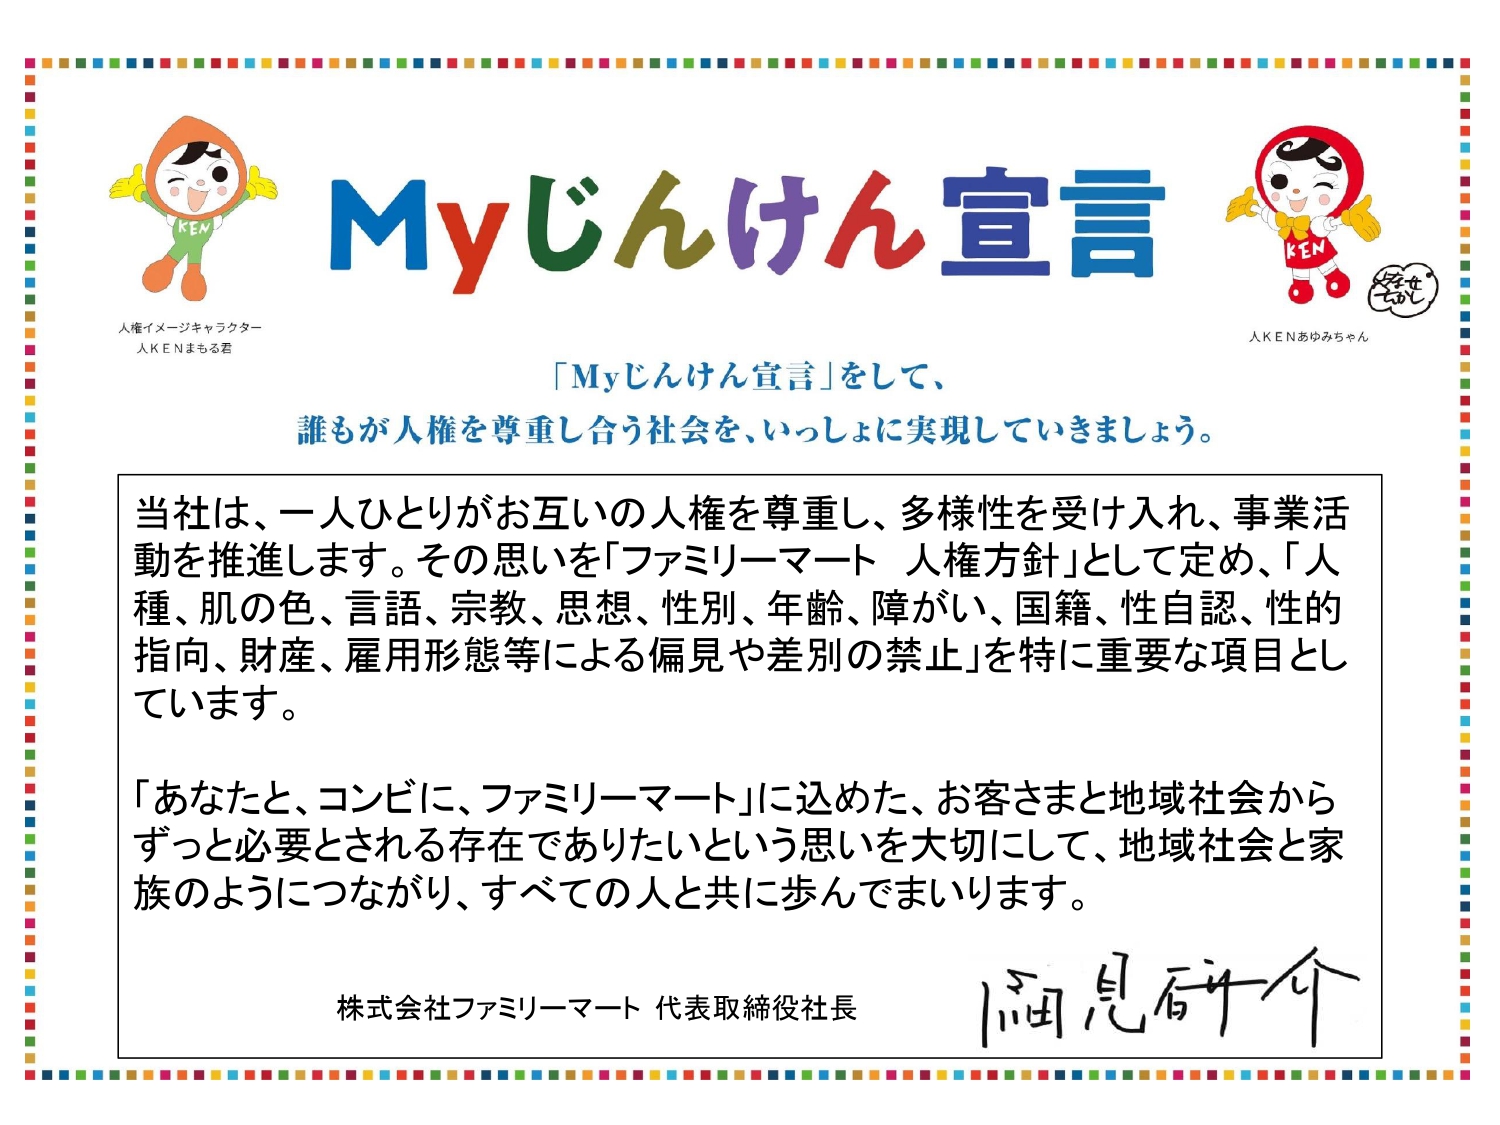 "My Jinken Declaration" promoted by the Ministry of Justice